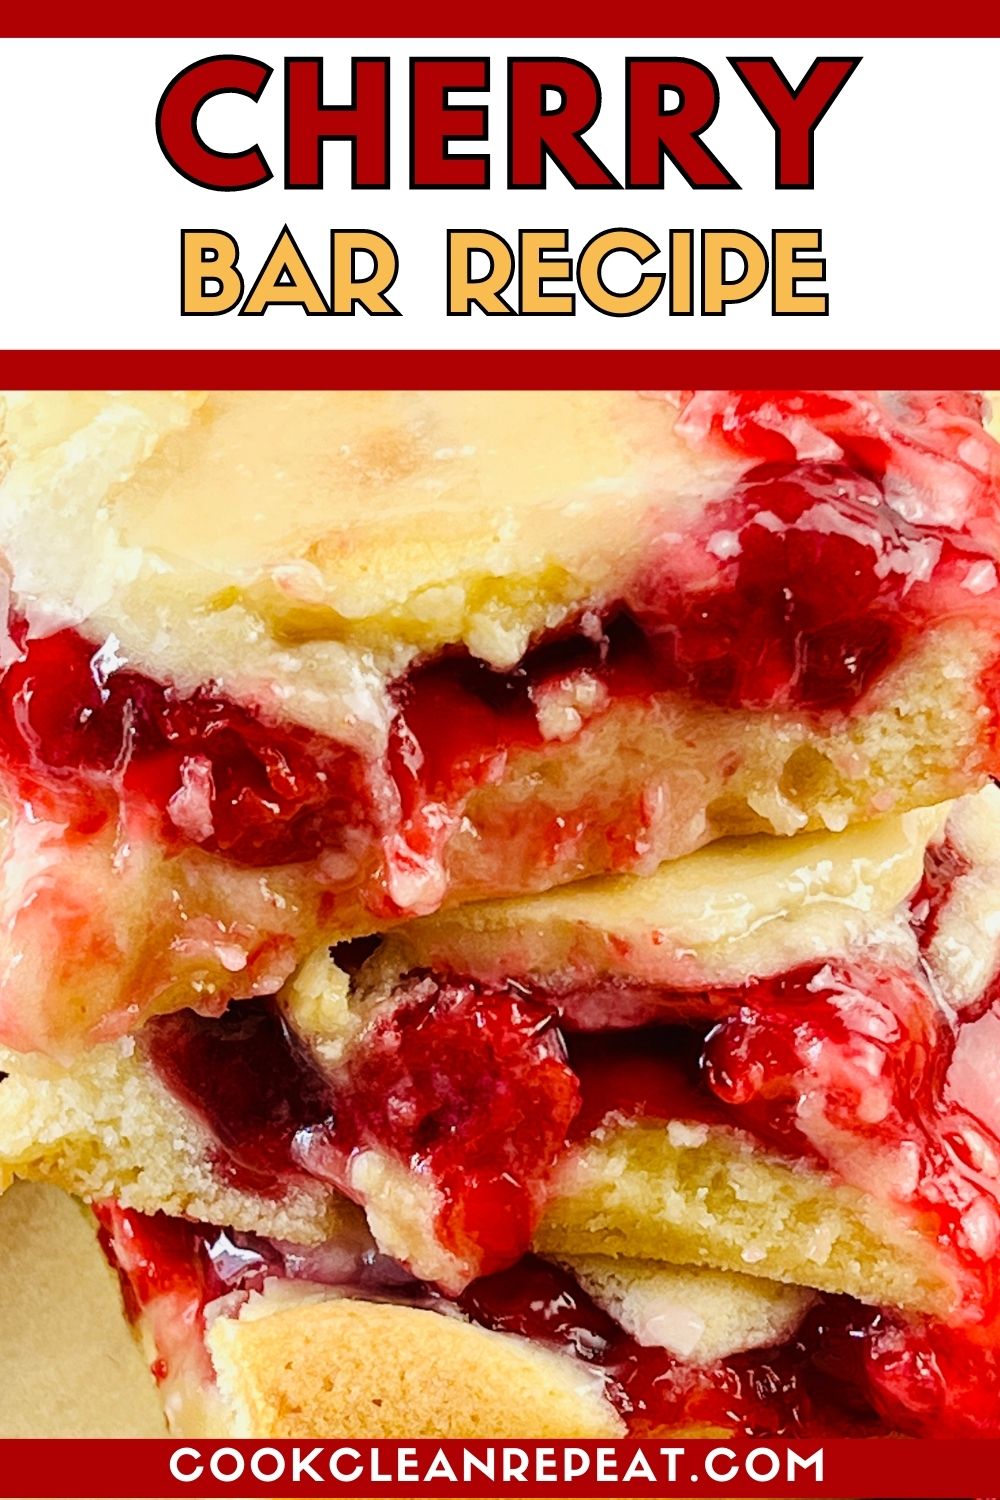 Pinterest image for this cherry bars recipe post